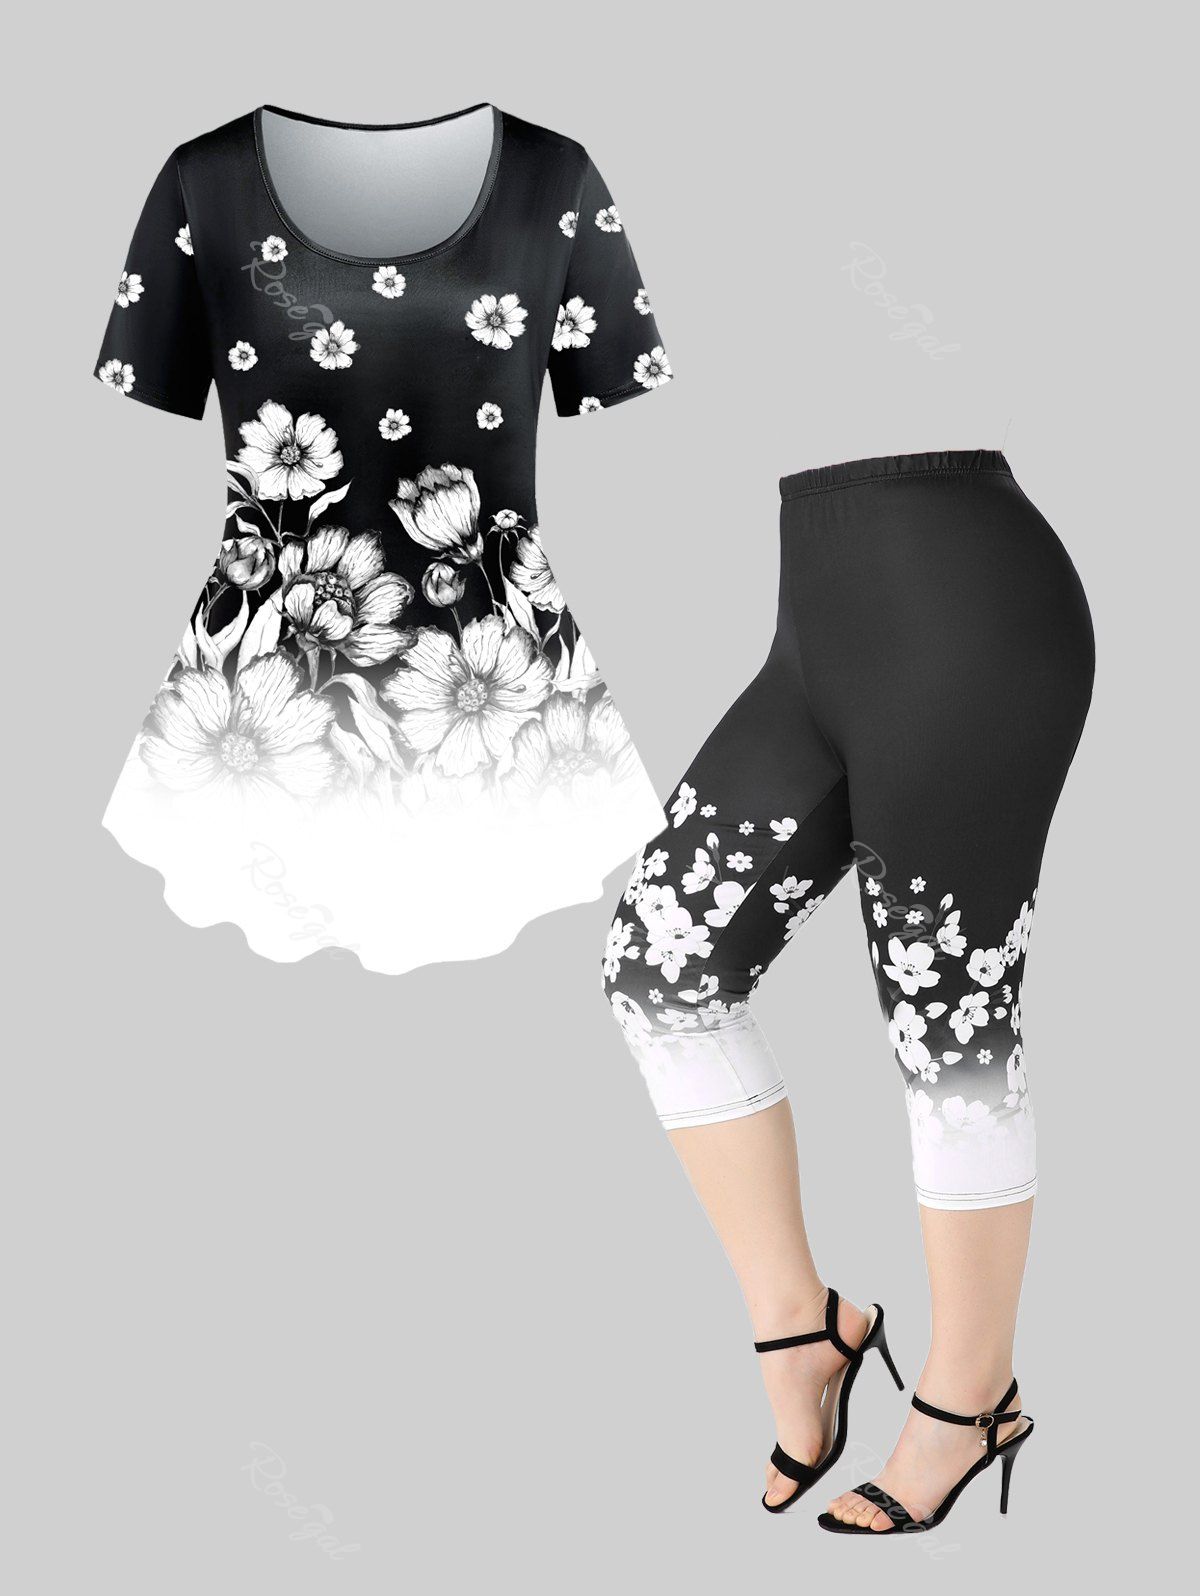 Shops Monochrome Floral Print Tee and Leggings Plus Size Summer Outfit  